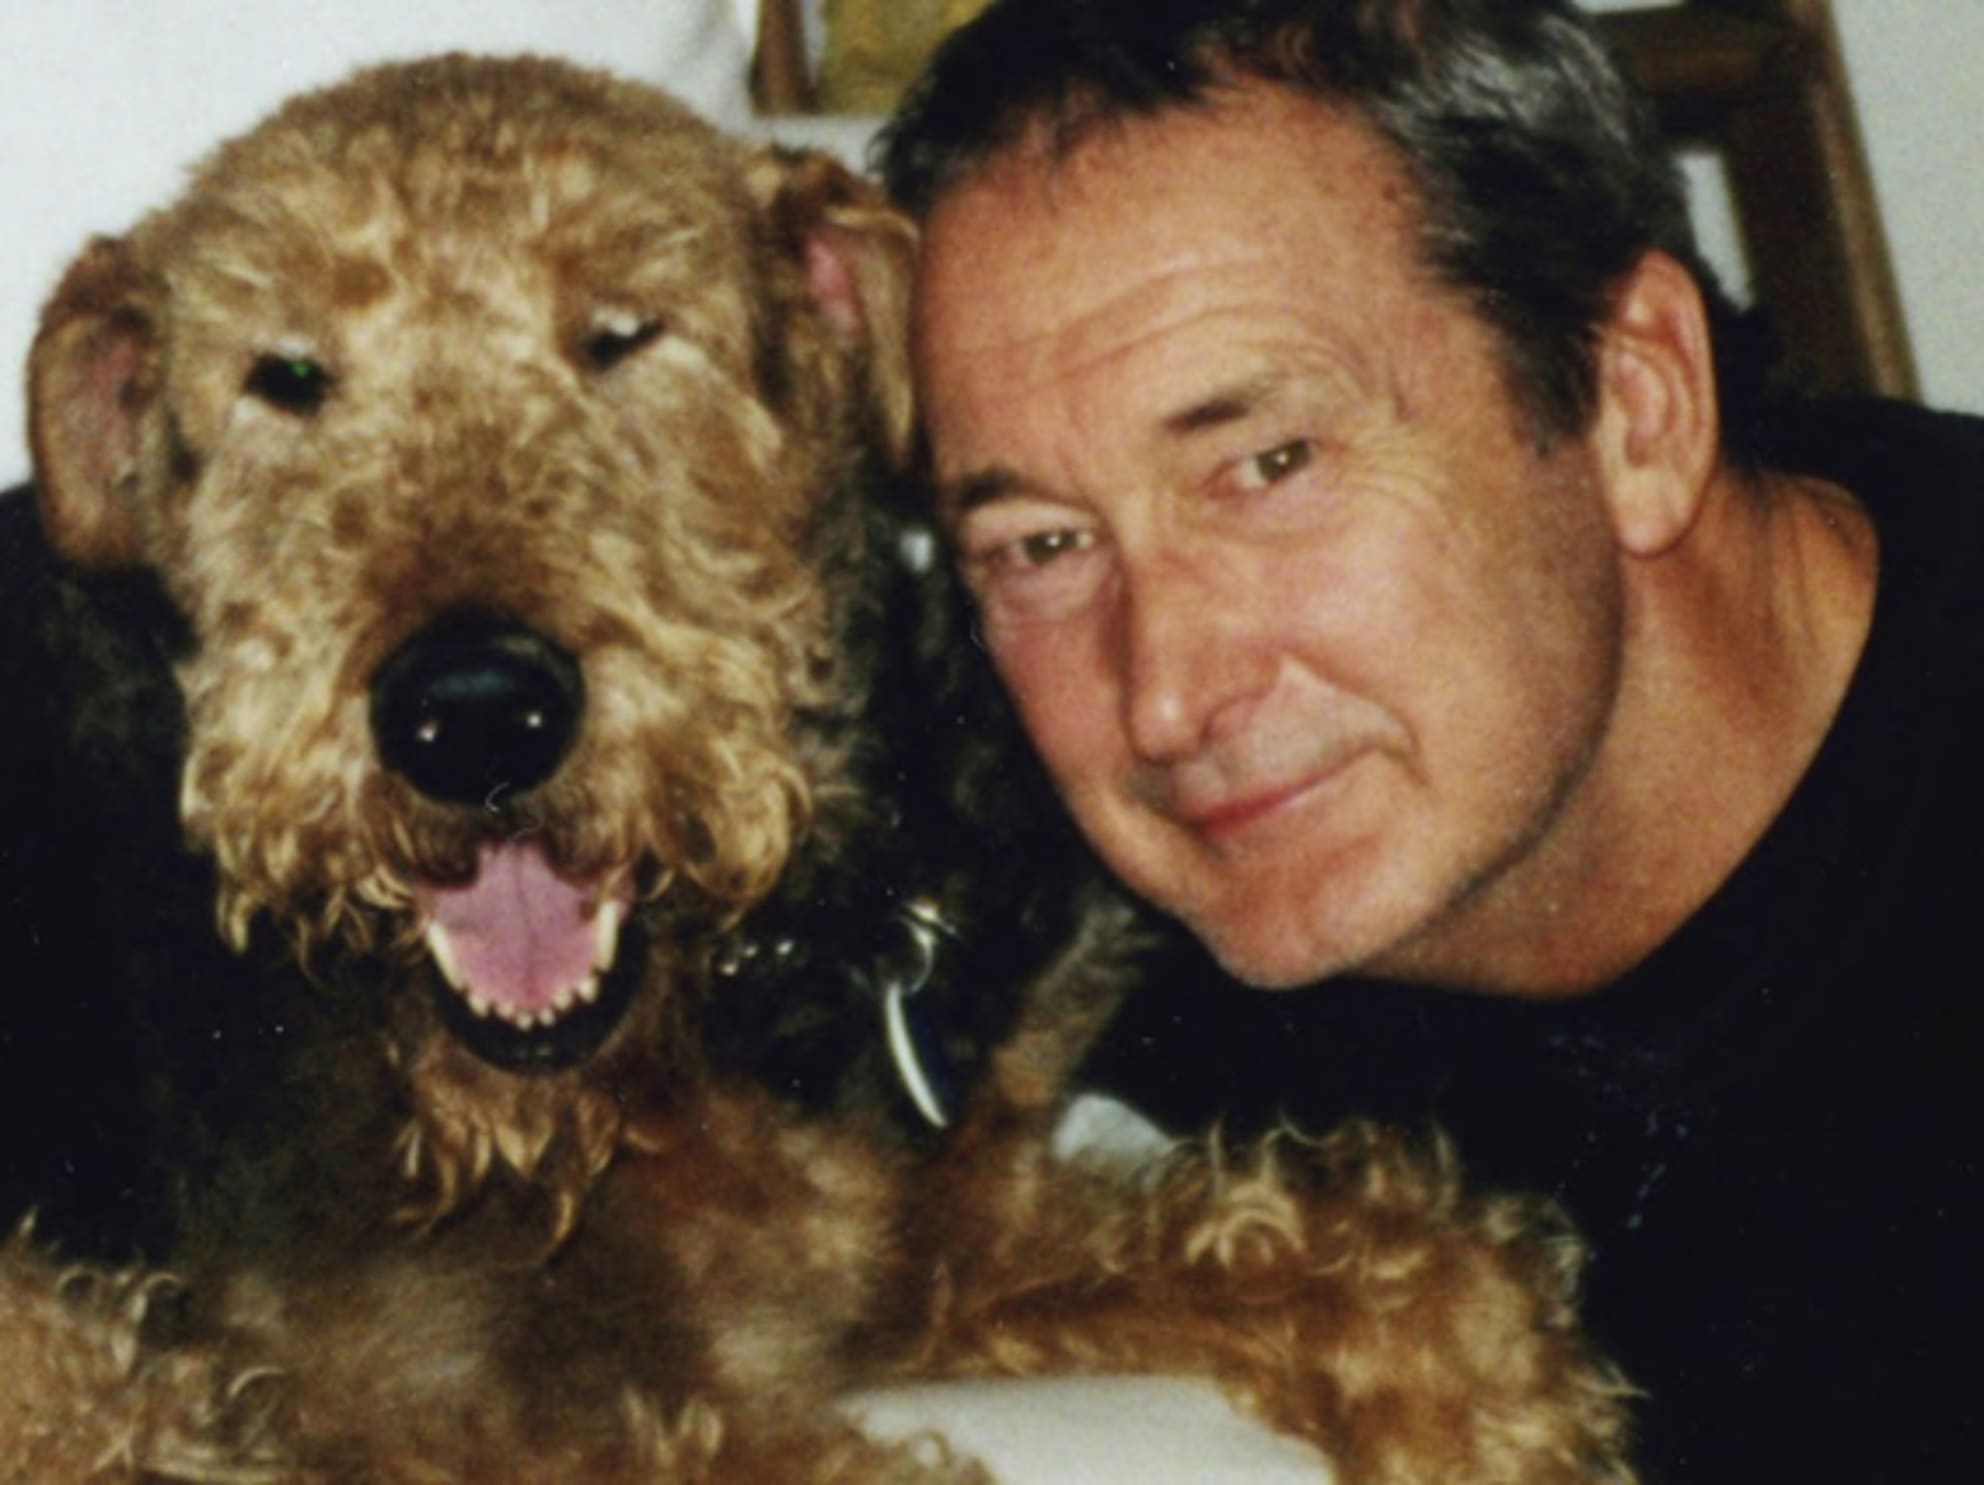 Blue, the dog, and his owner, Bill Bishop